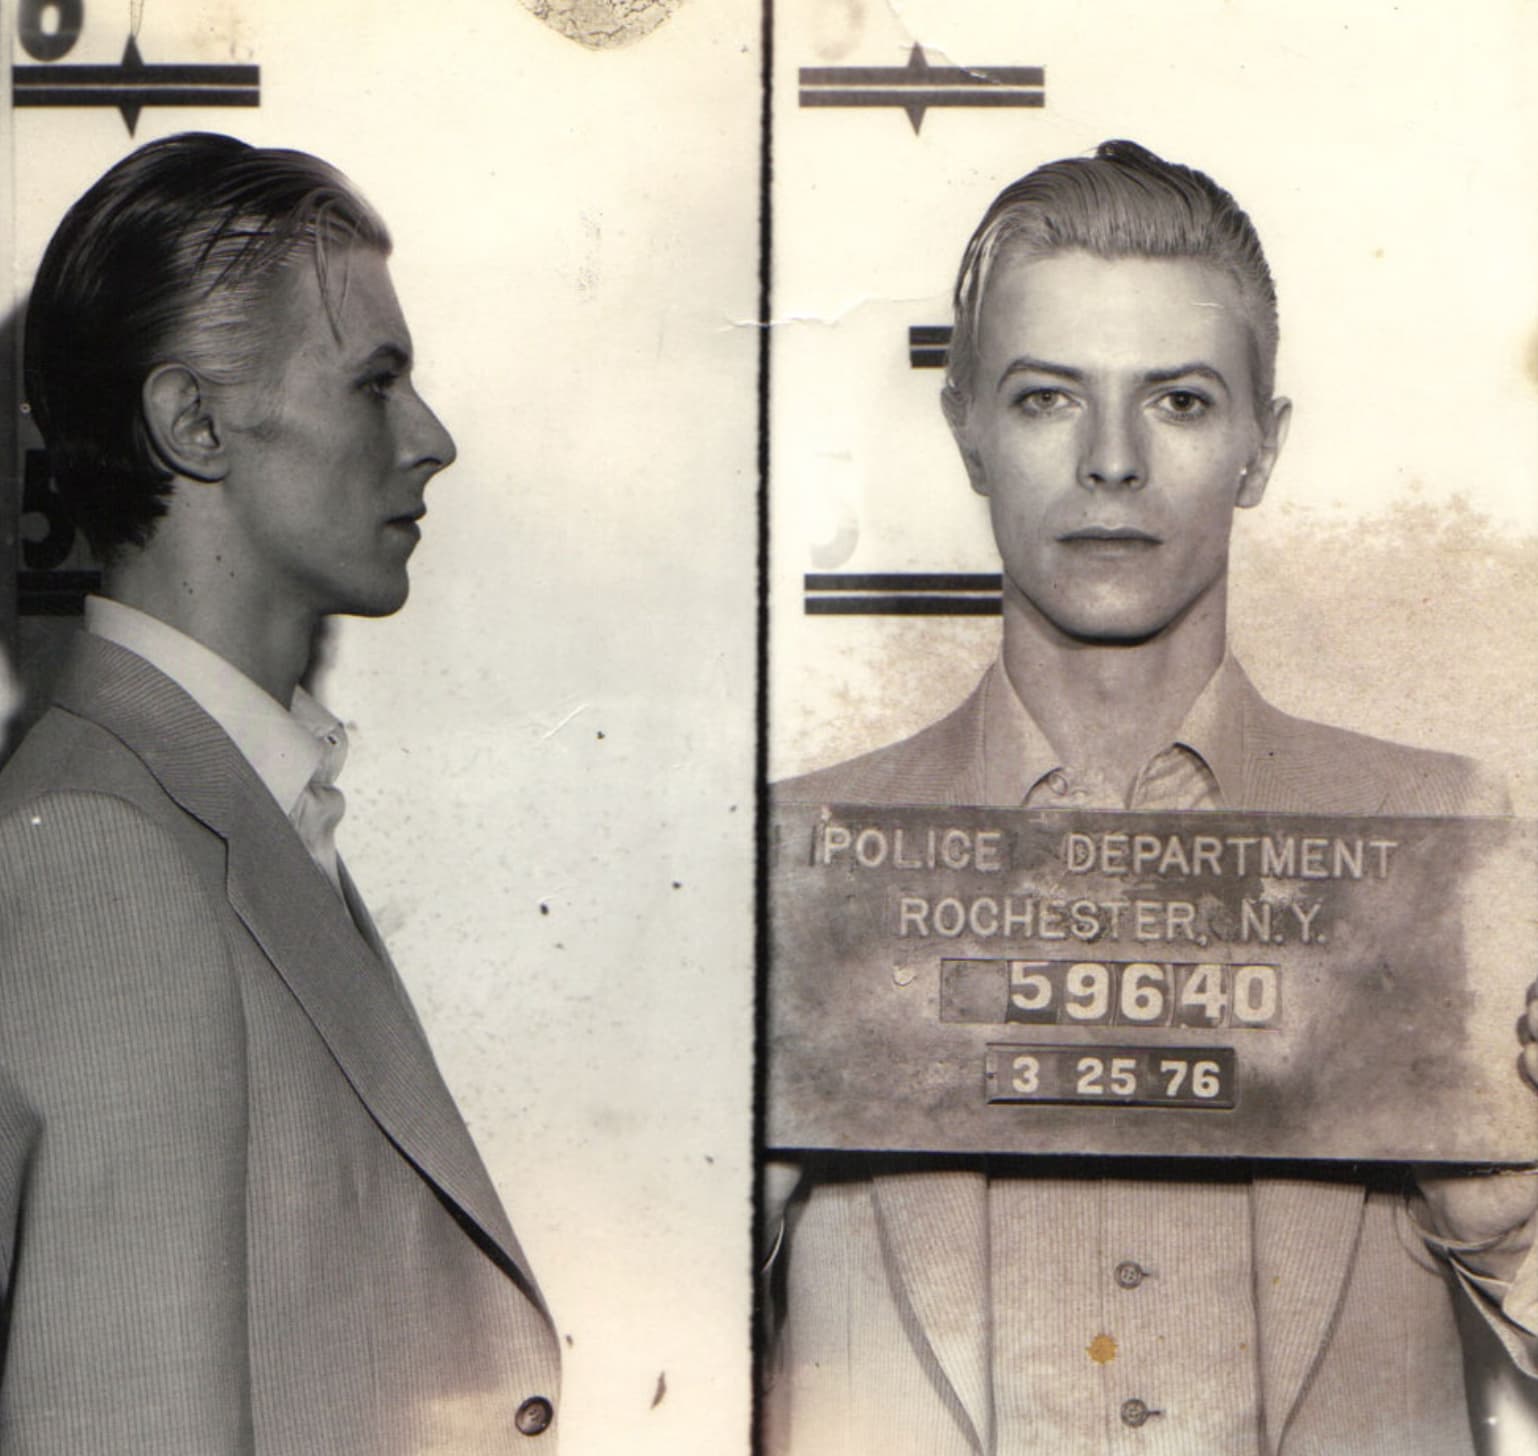 david bowie mug shots - Ipolice Department Rochester, Ny. 59640 325 76